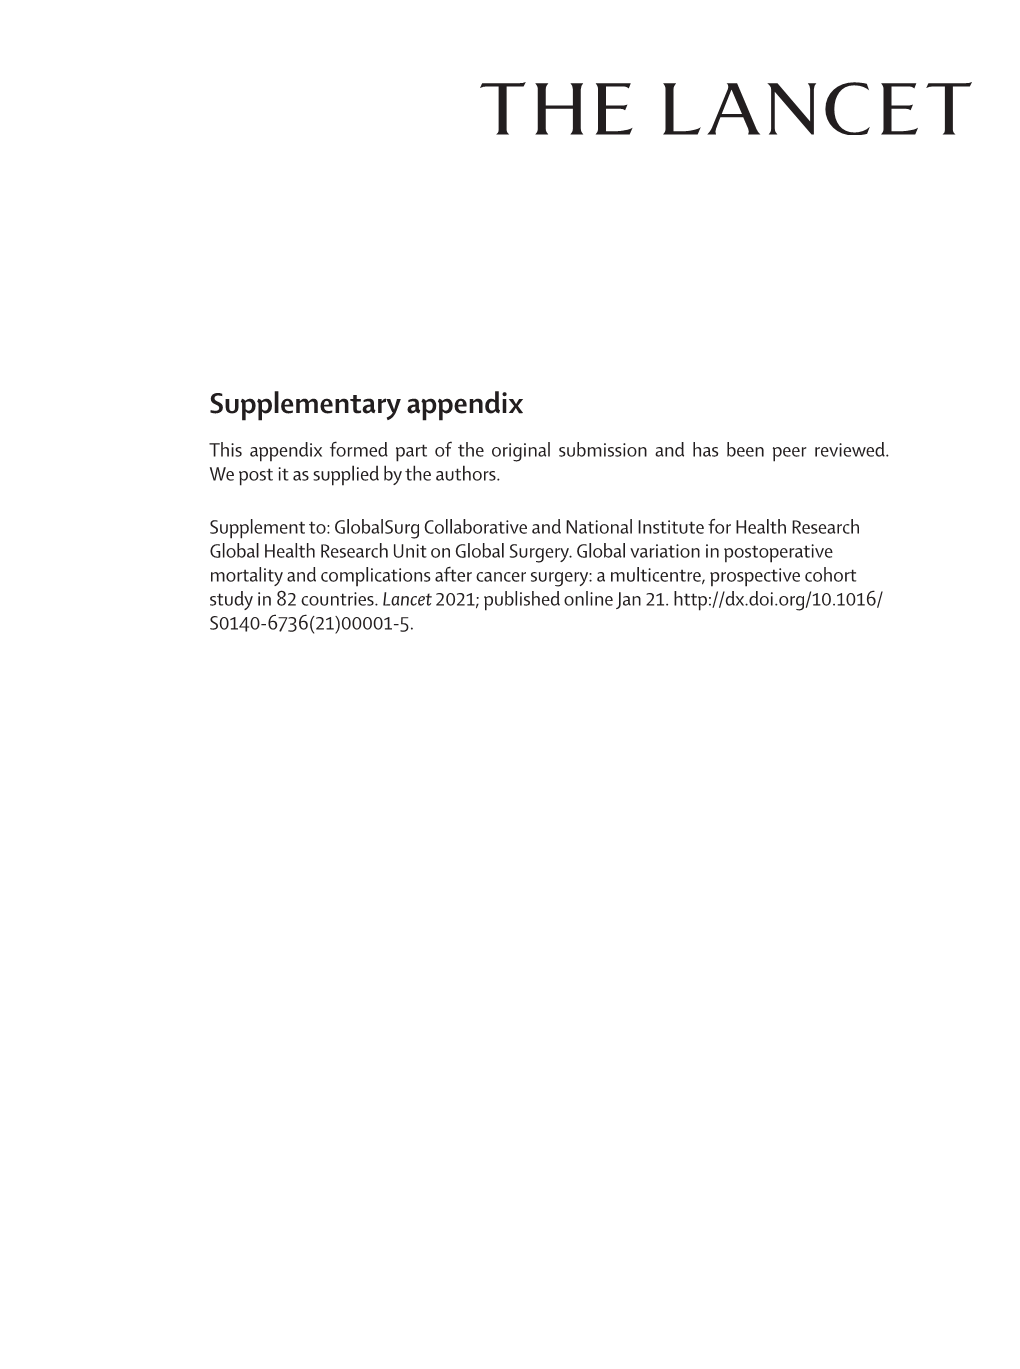 Supplementary Appendix This Appendix Formed Part of the Original Submission and Has Been Peer Reviewed